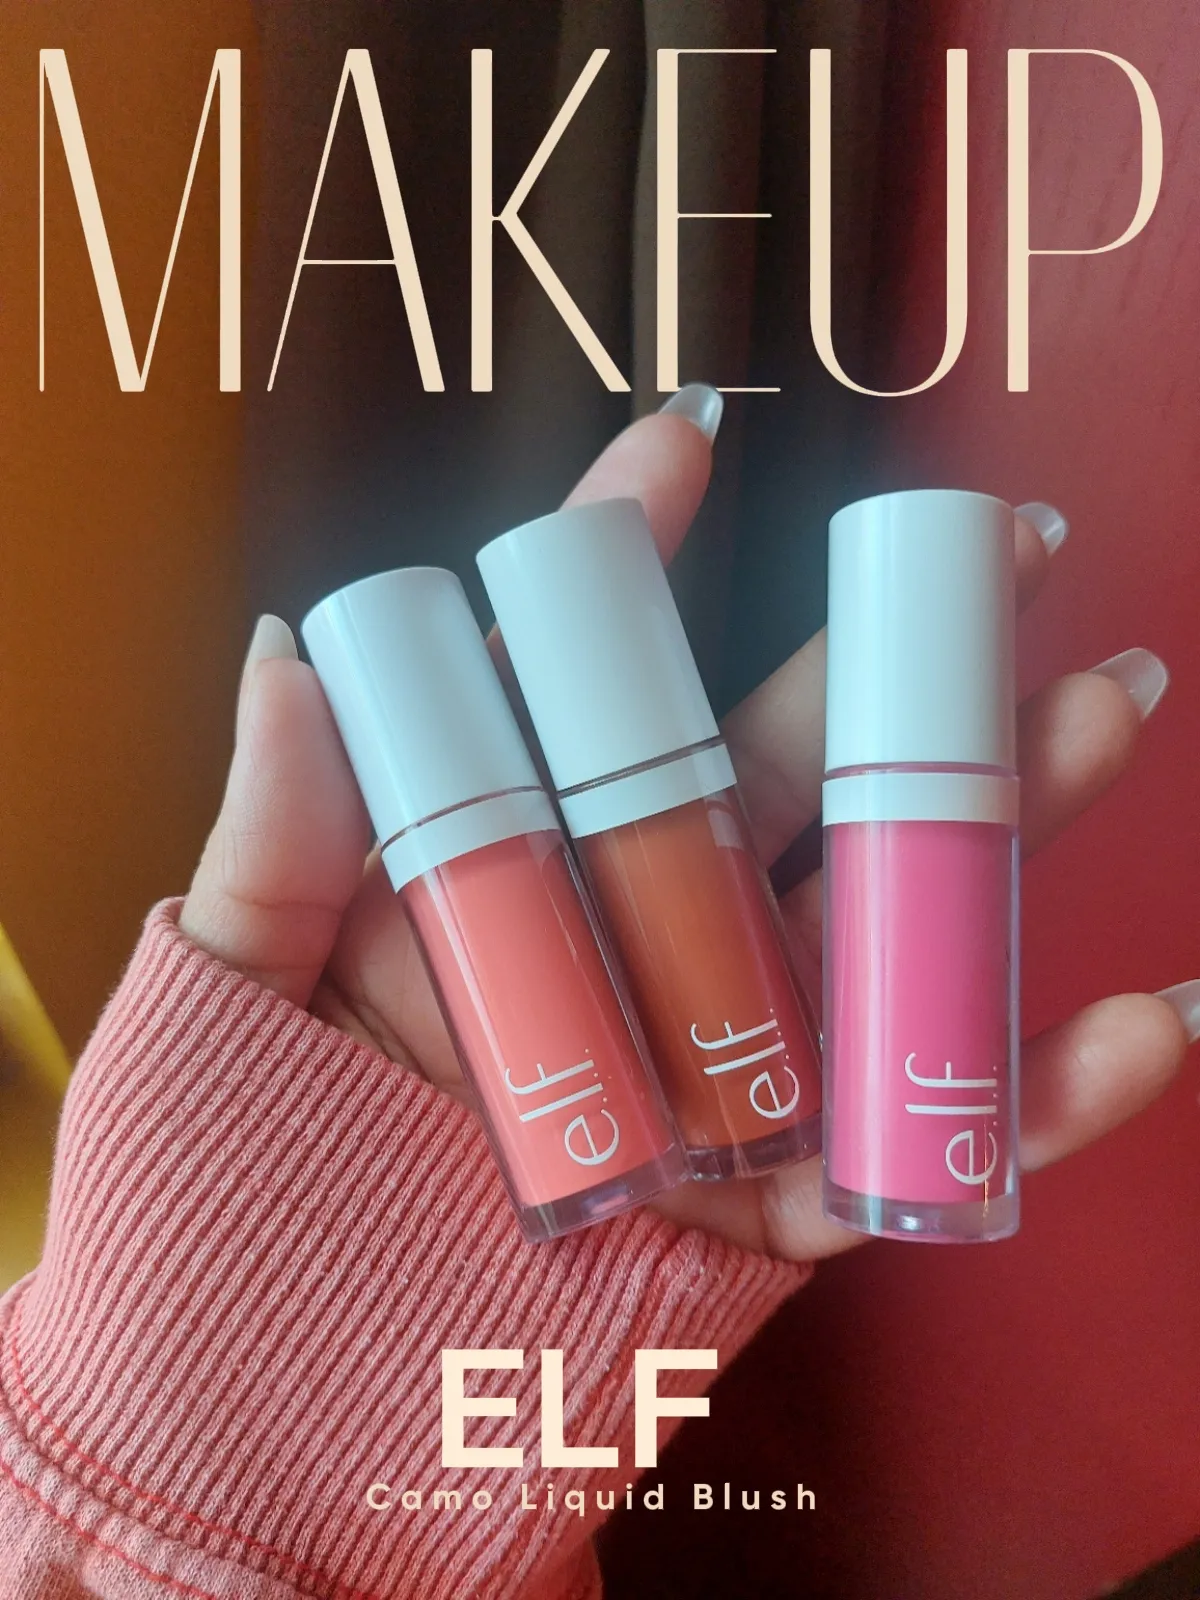 Elf Camo Liquid Blush Swatches and Review - Coffee & Makeup